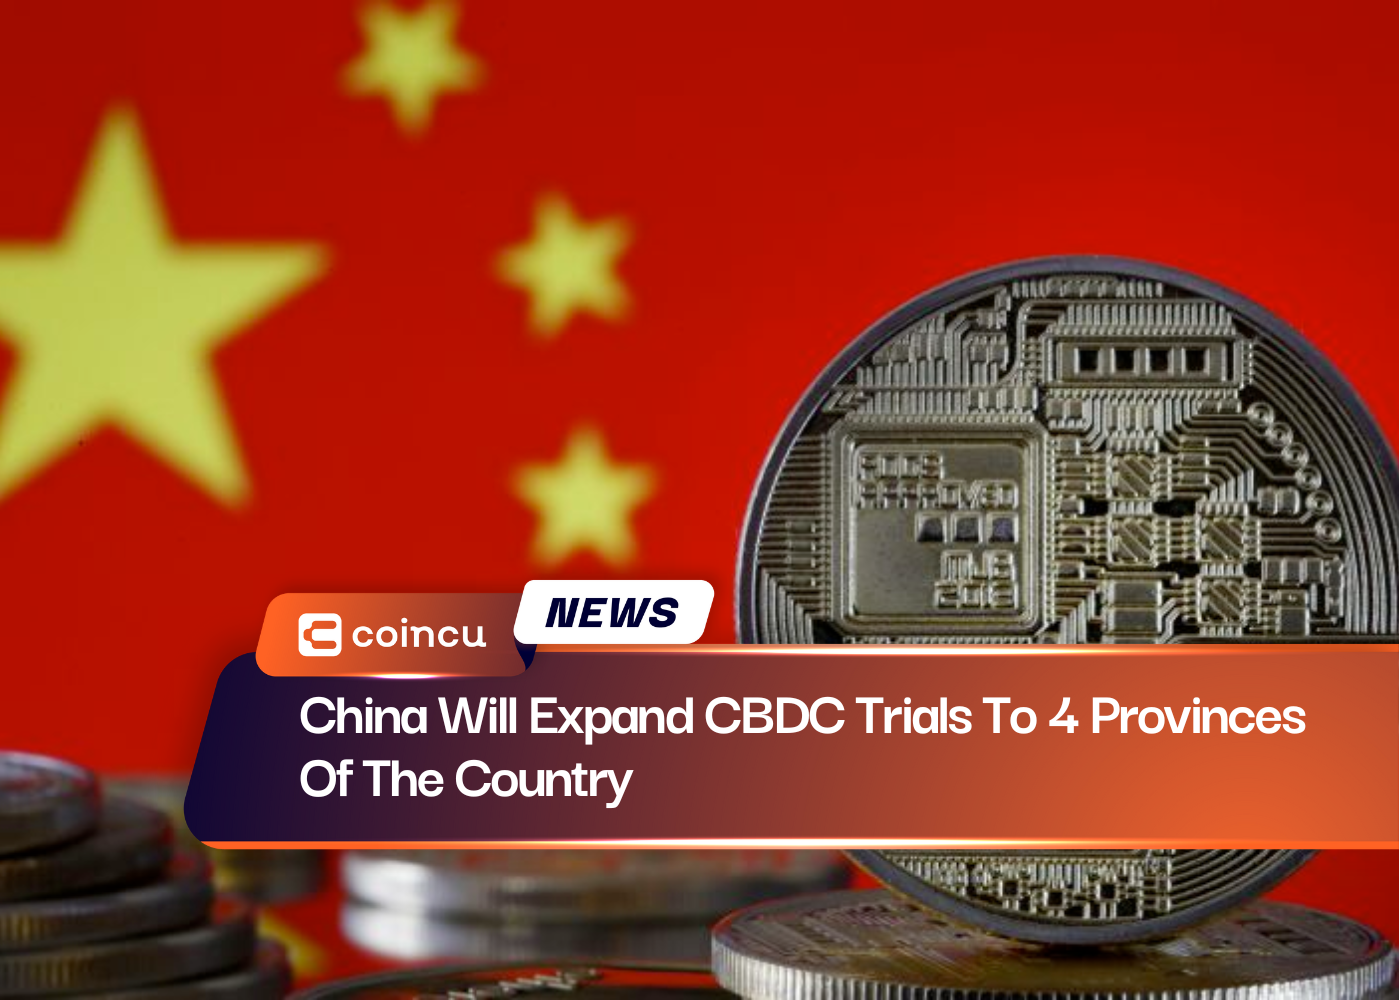 China Will Expand CBDC Trials To 4 Provinces Of The Country